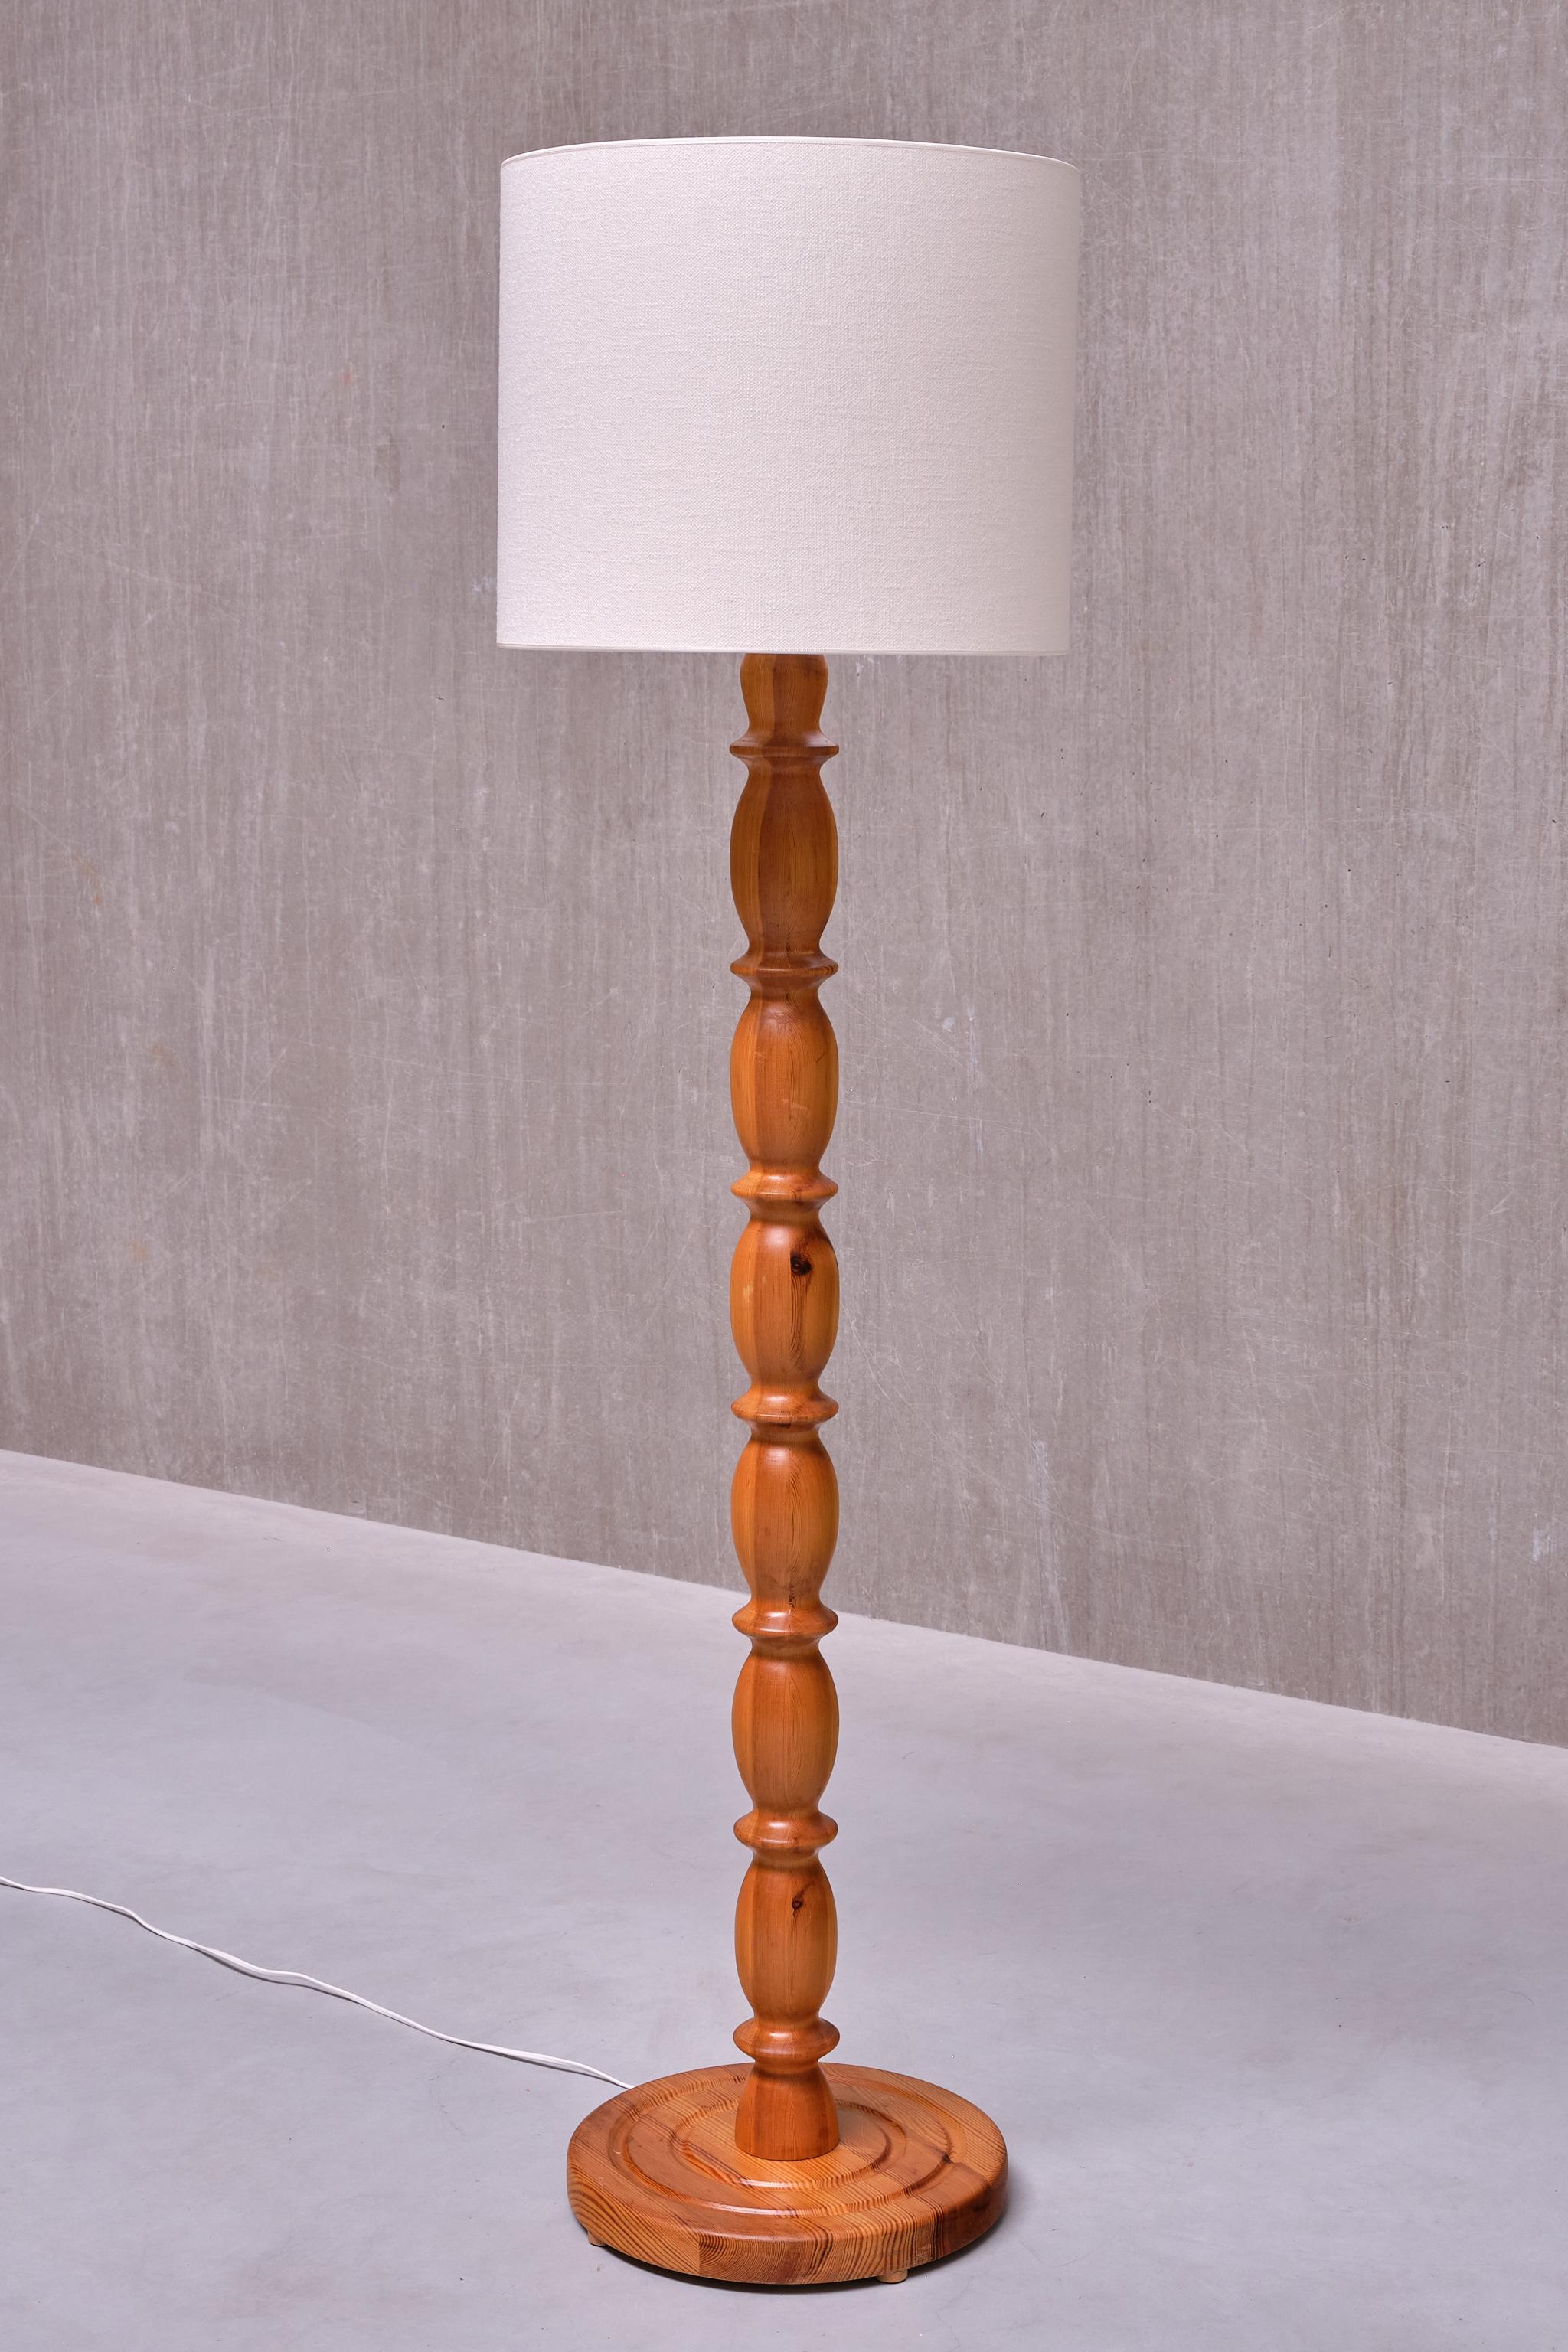 Swedish Modern Floor Lamp in Carved Solid Pine Wood, 1960s For Sale 1